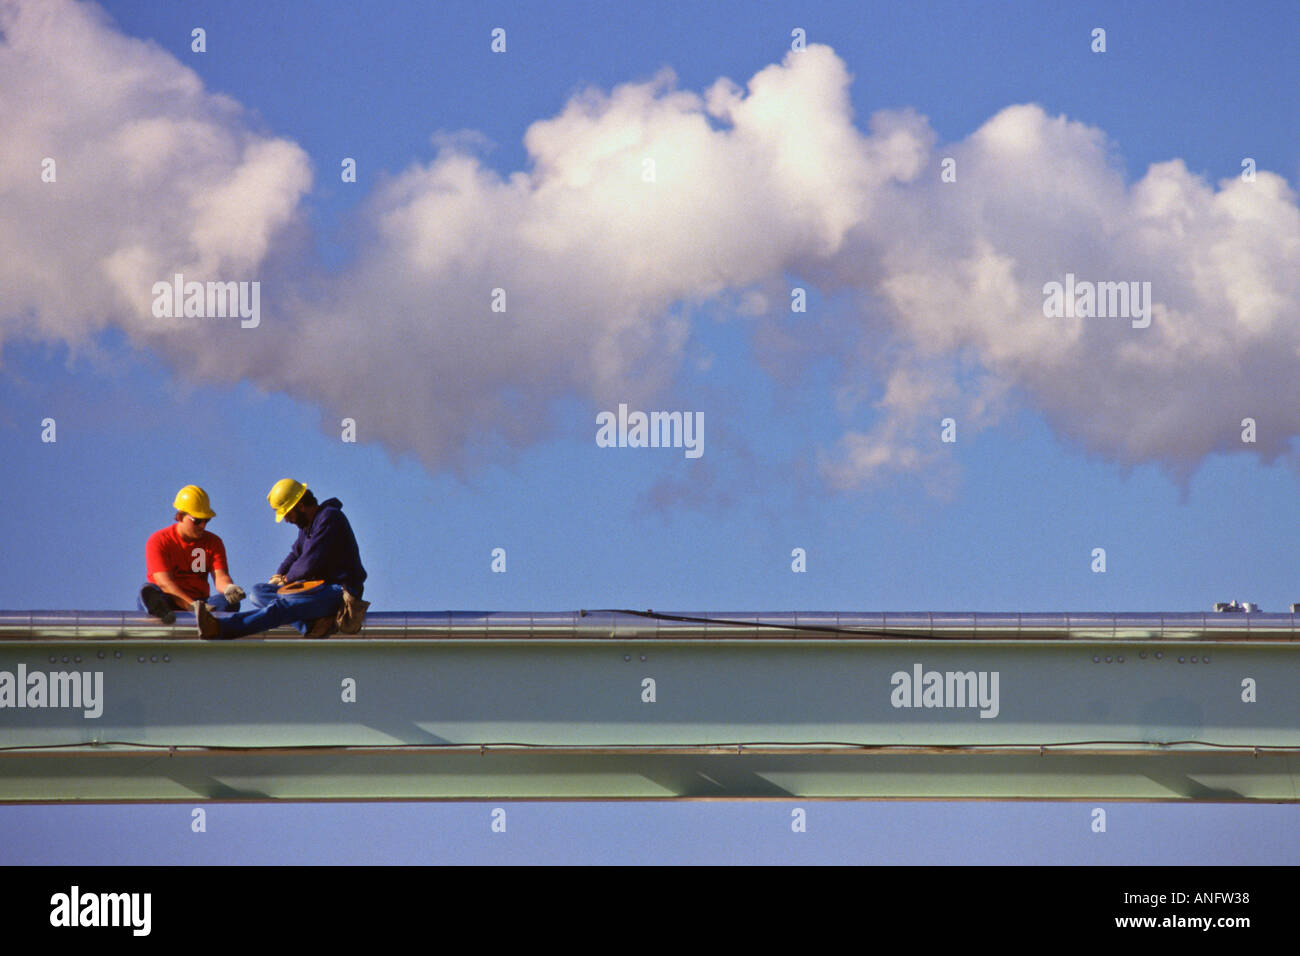 Pipefitters working on chemical pipes on top of steel beams near Hannibal Missouri USA Stock Photo